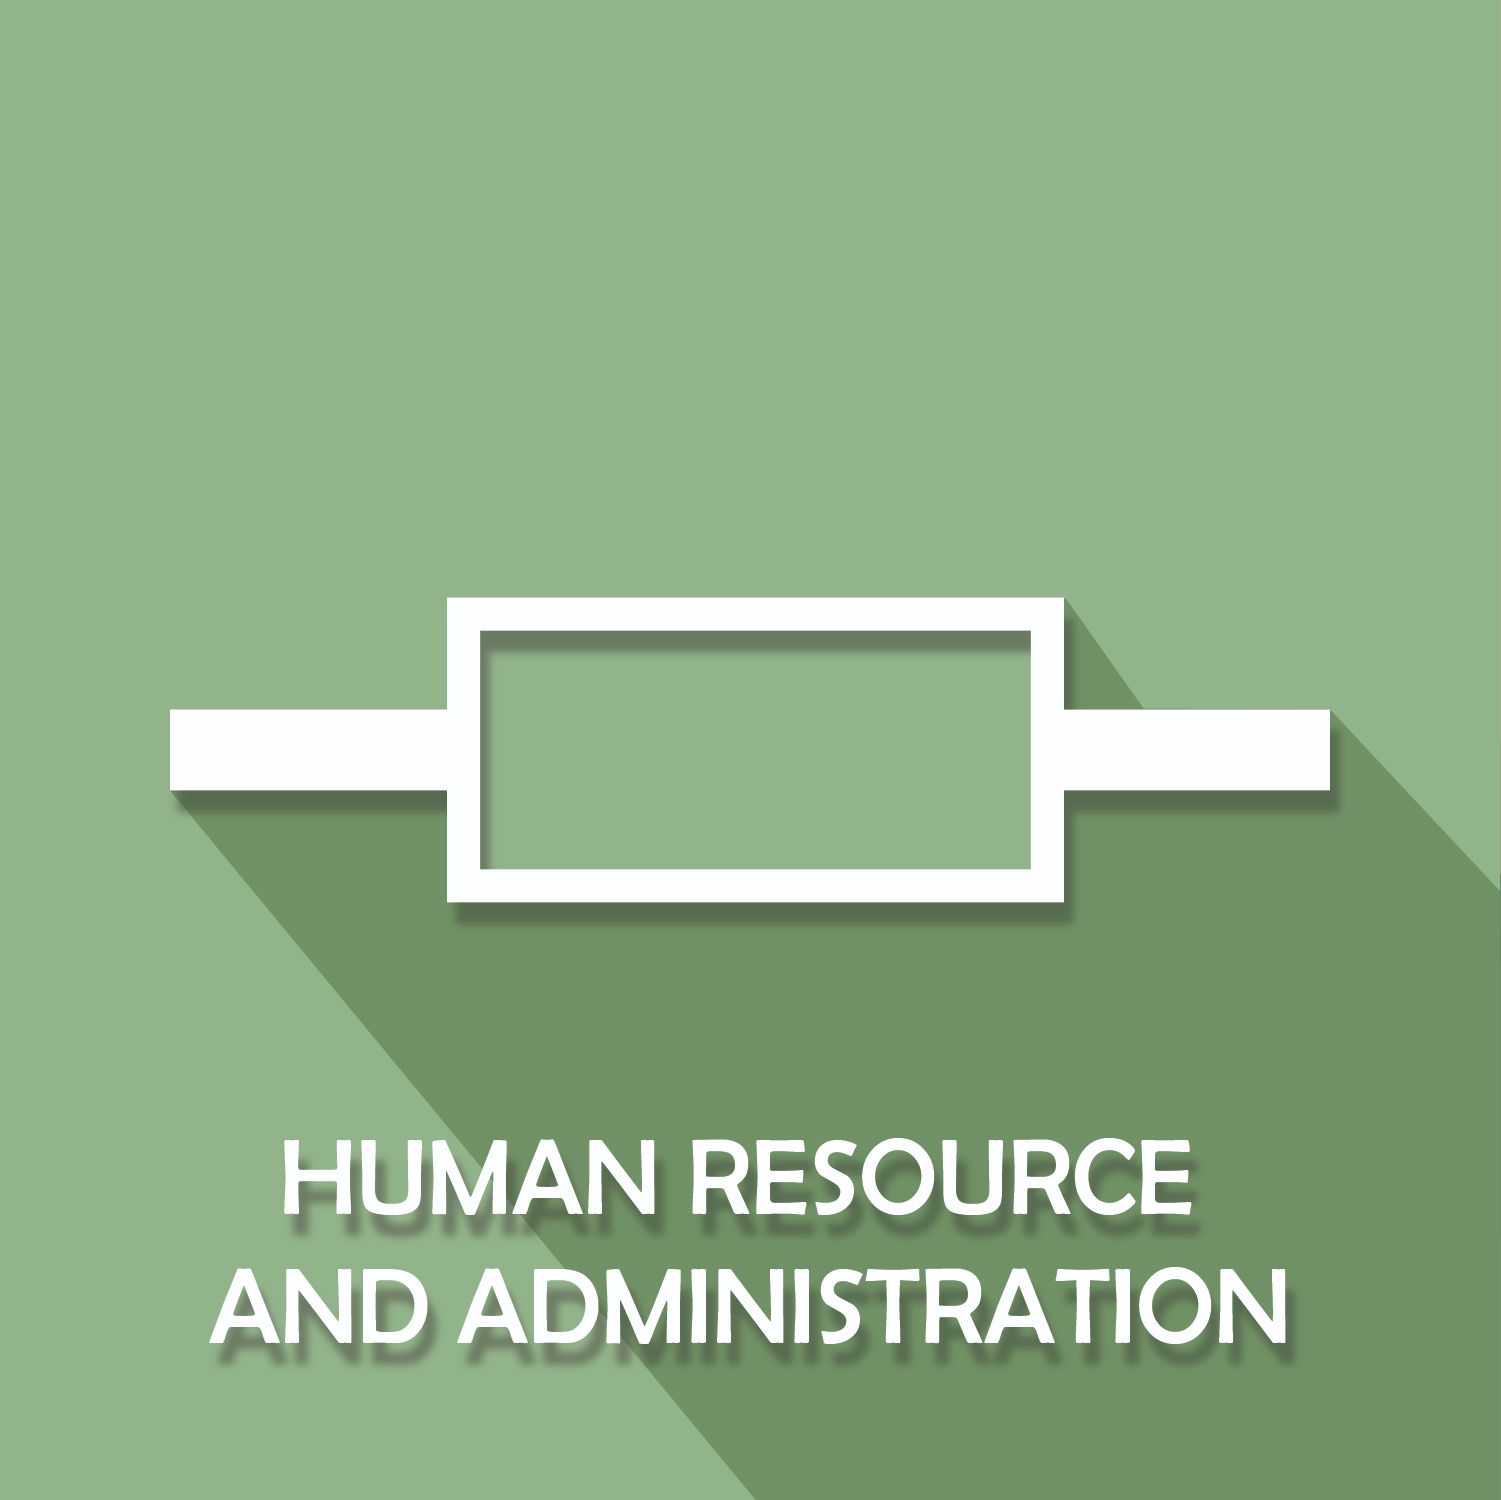 Human Resource and Administration
